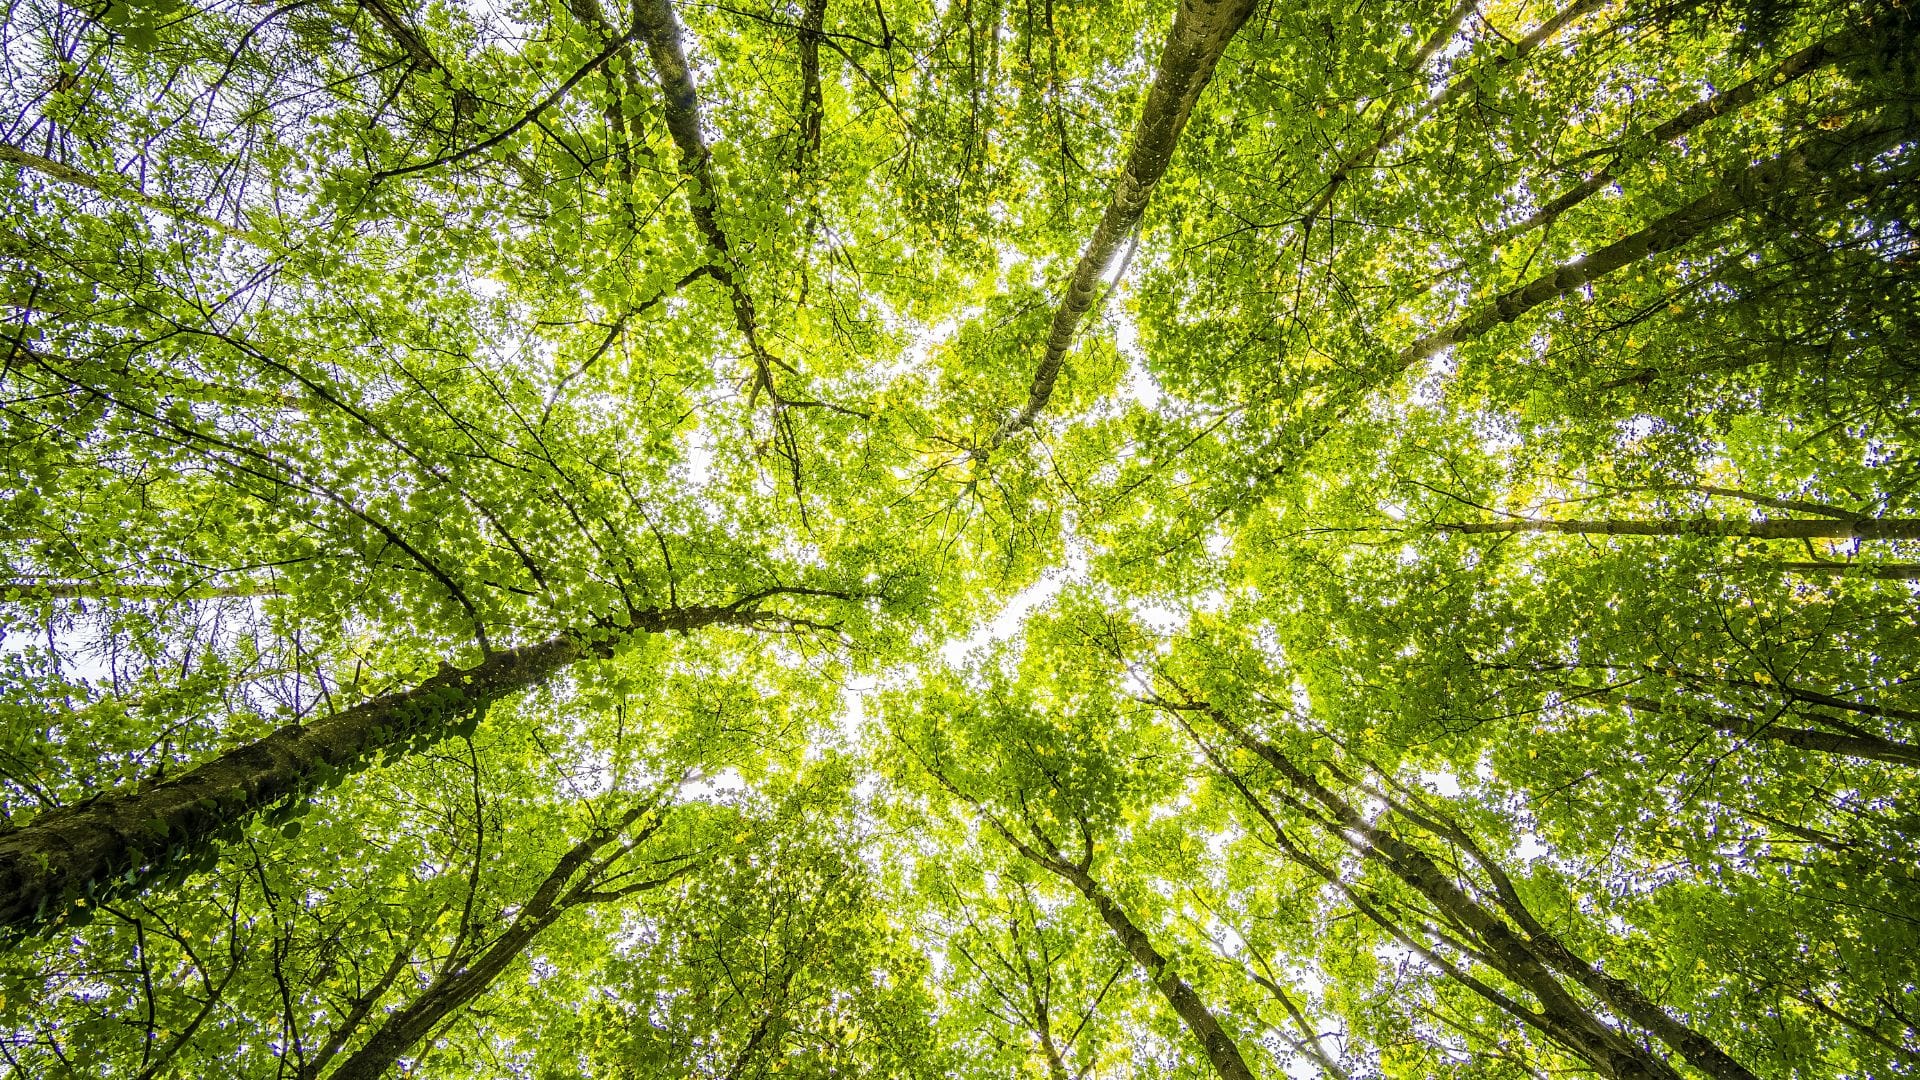 Looking straight up at a canopy of bright green tree tops from the forest floor